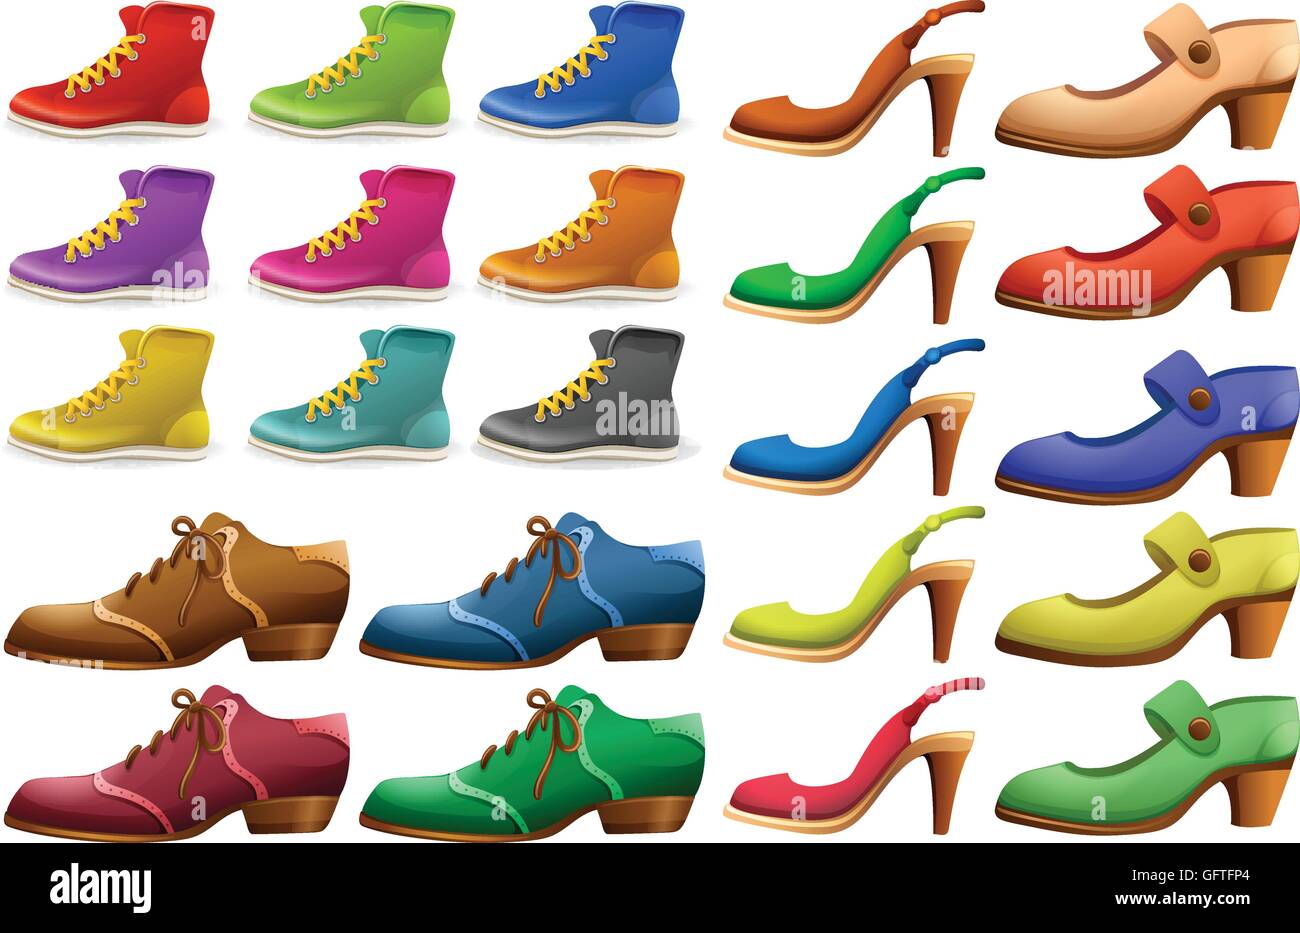 Different designs of shoes illustration Stock Vector